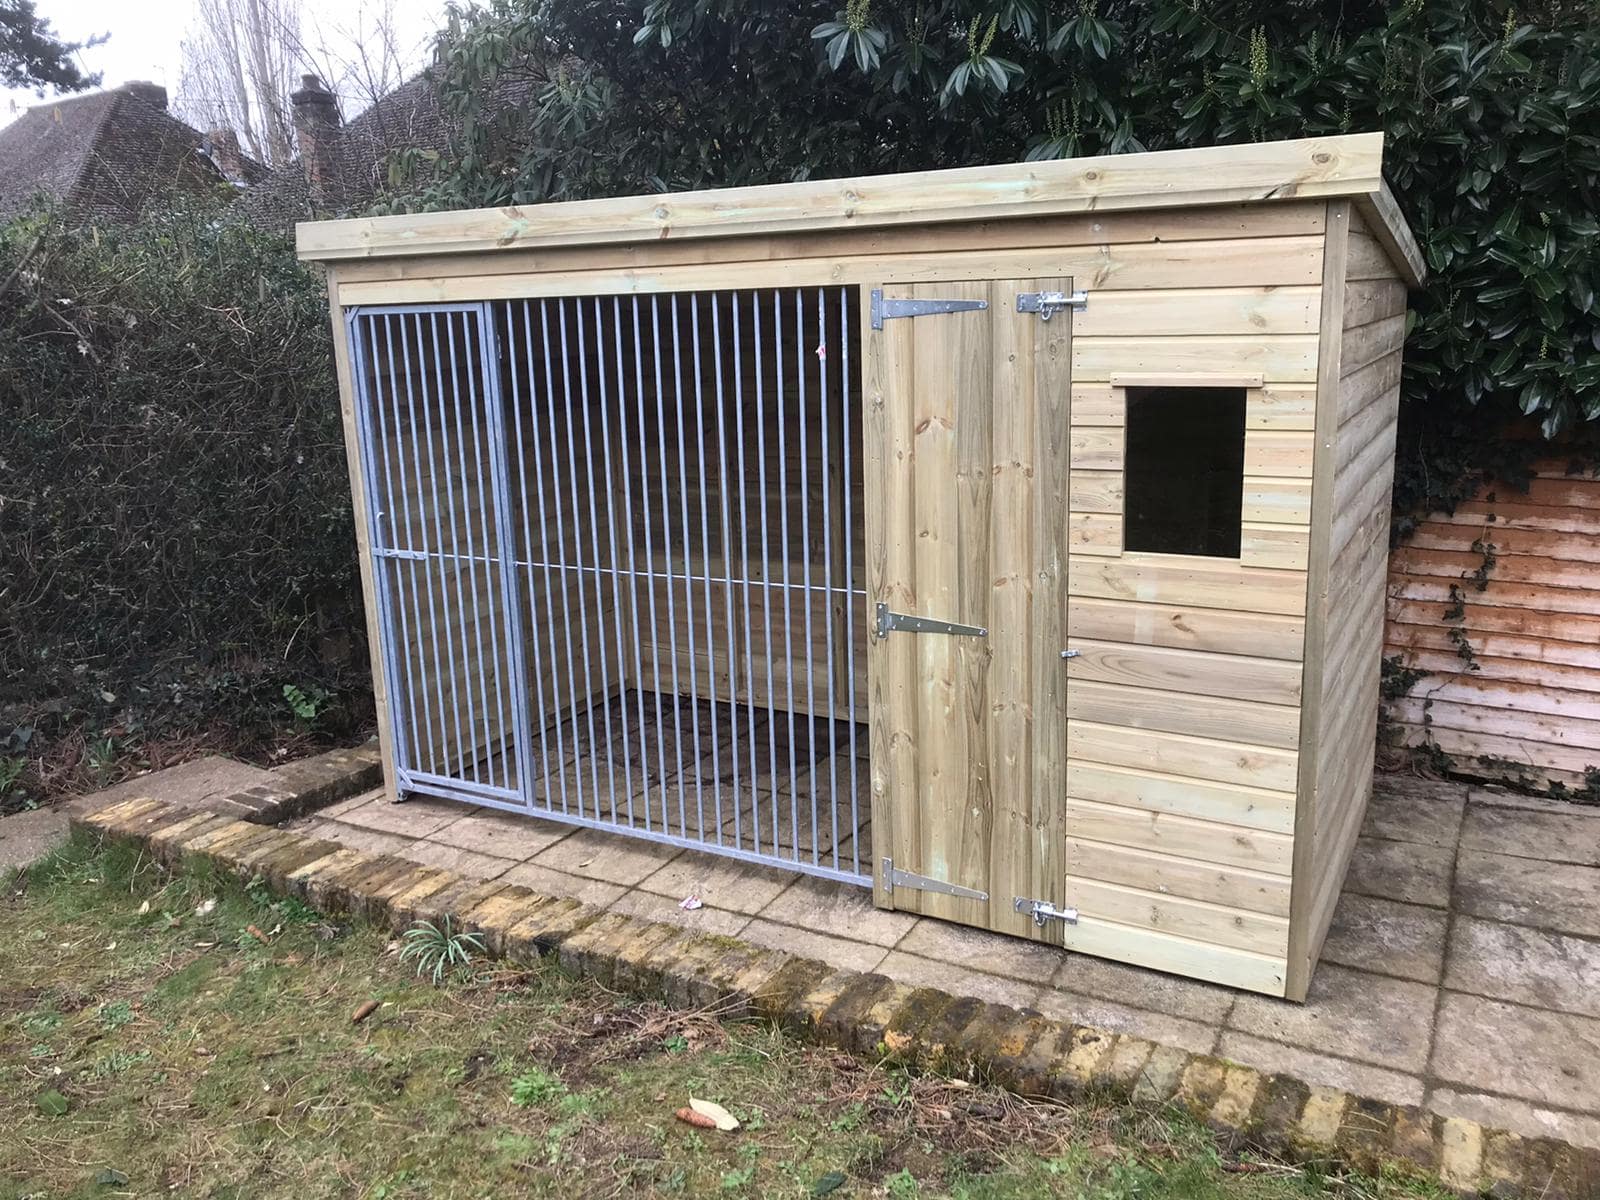 Stapeley Dog Kennel 12ft (wide) x 5ft (deep) x 6'6ft (high)